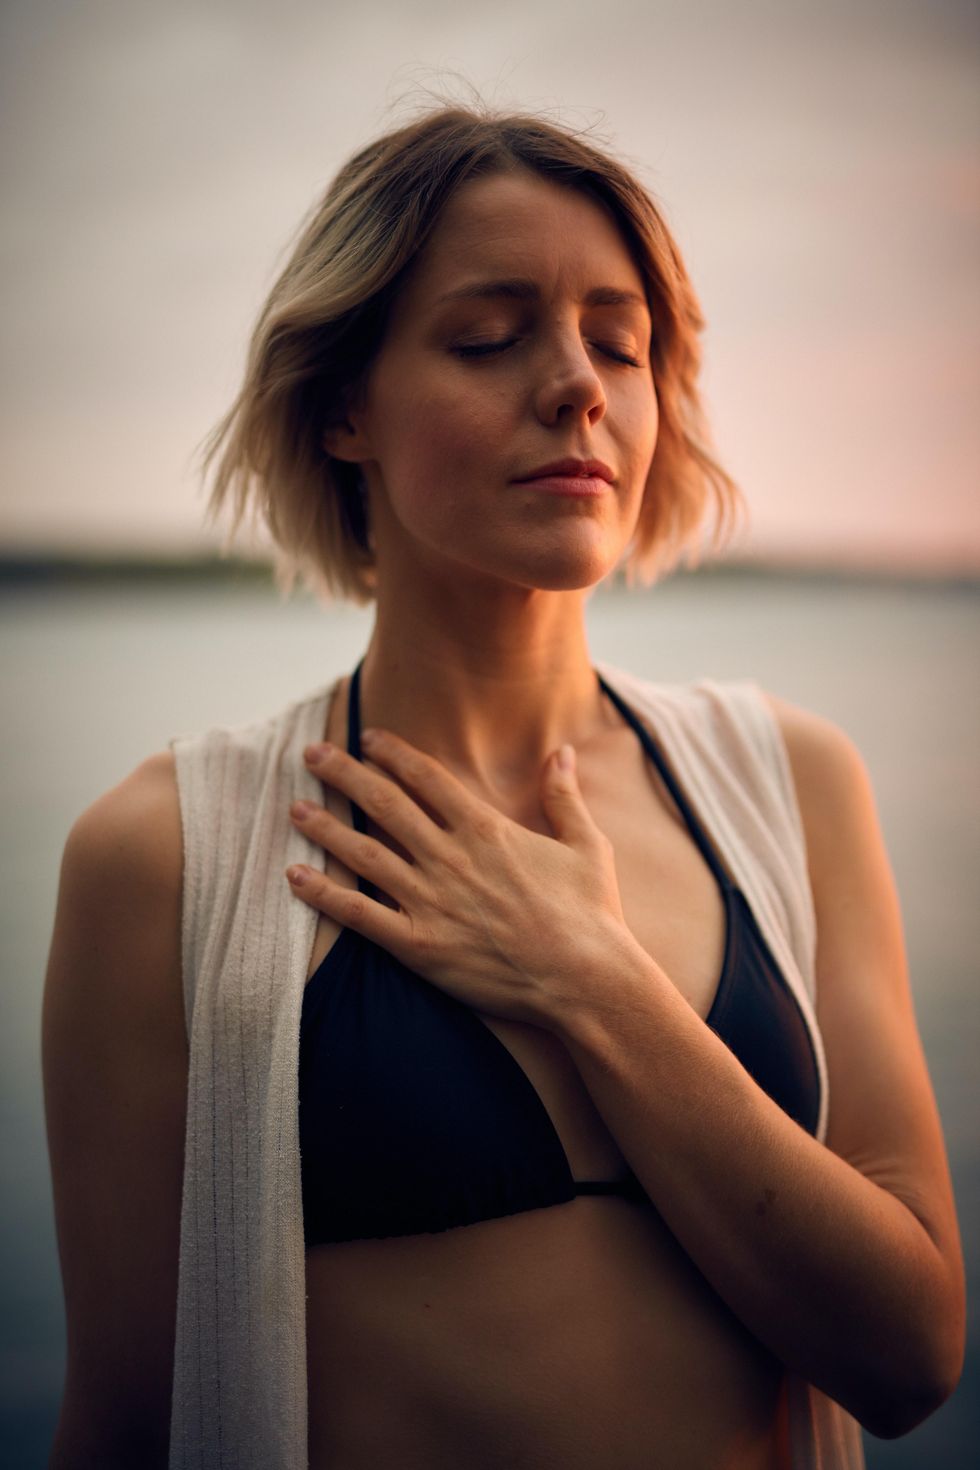 A woman meditating, with hand on heart.